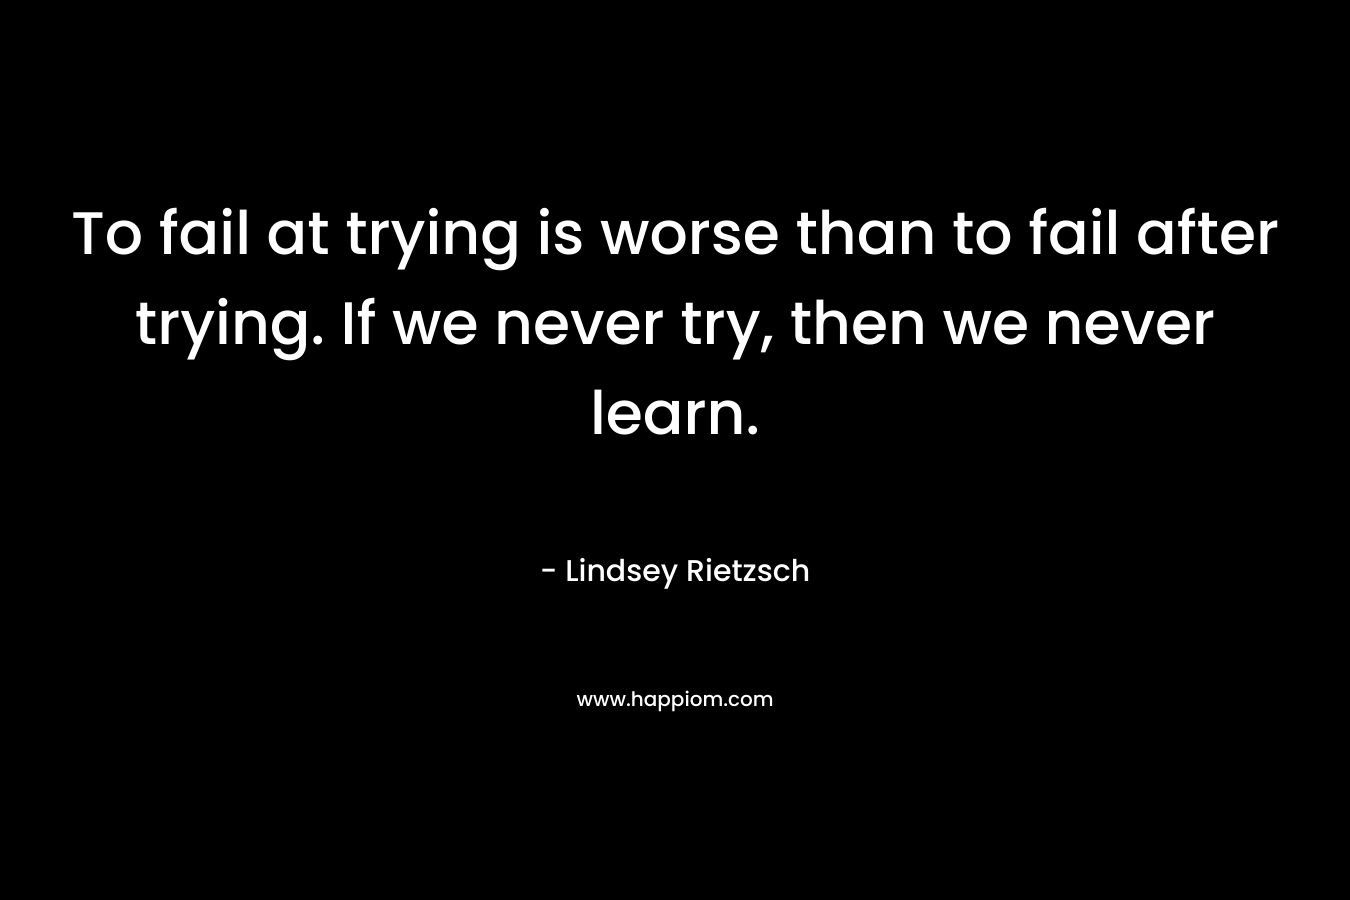 To fail at trying is worse than to fail after trying. If we never try, then we never learn.